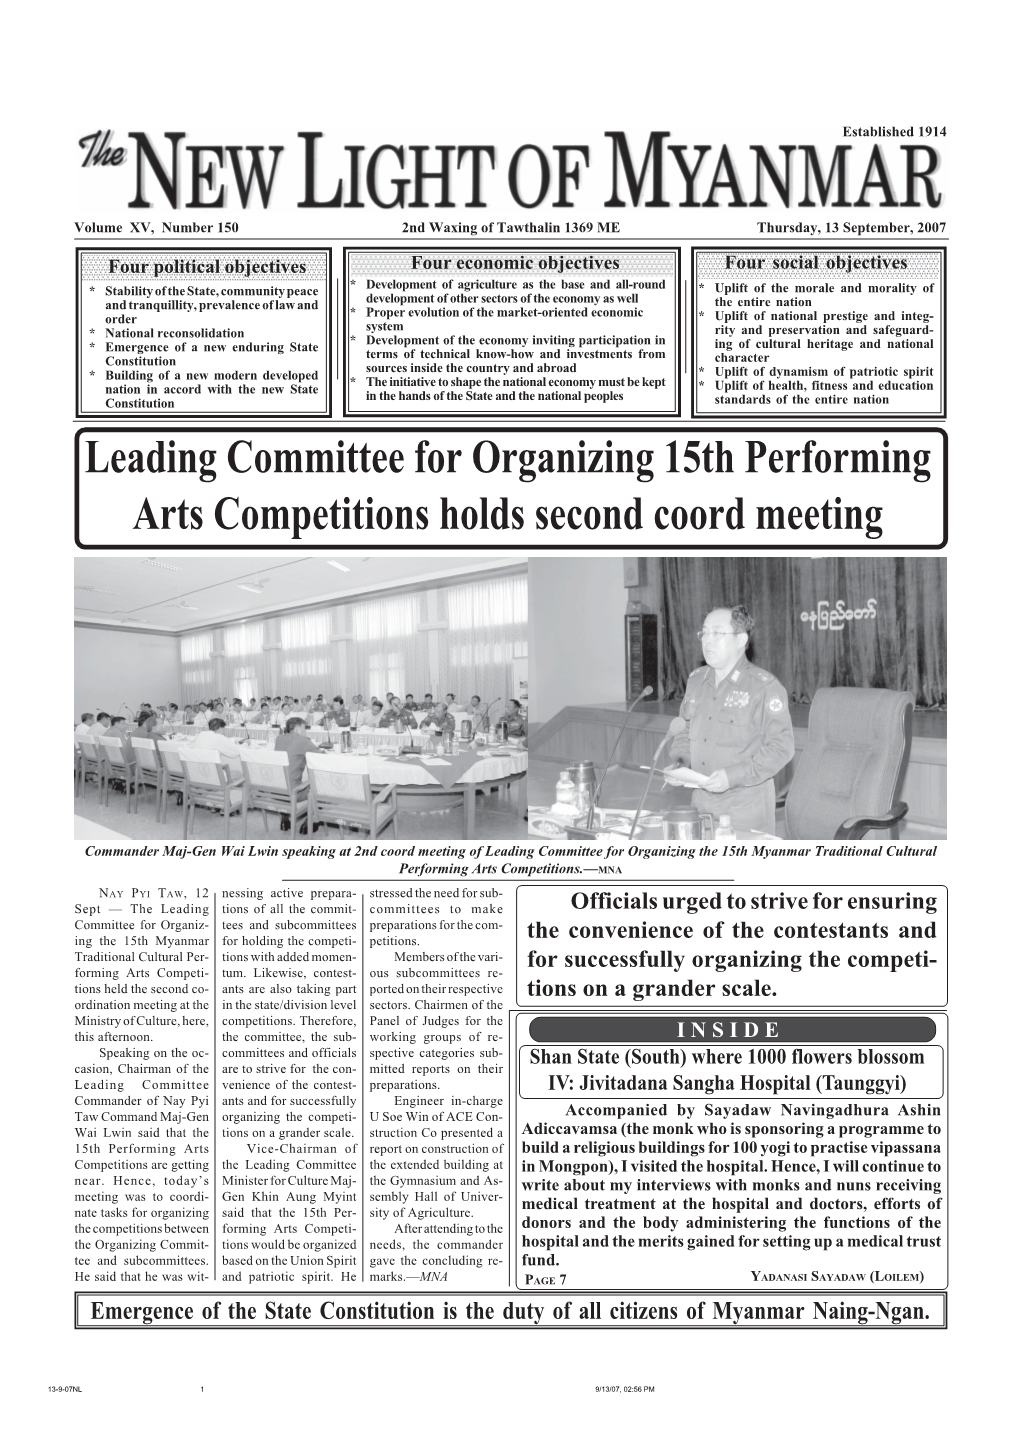 Leading Committee for Organizing 15Th Performing Arts Competitions Holds Second Coord Meeting